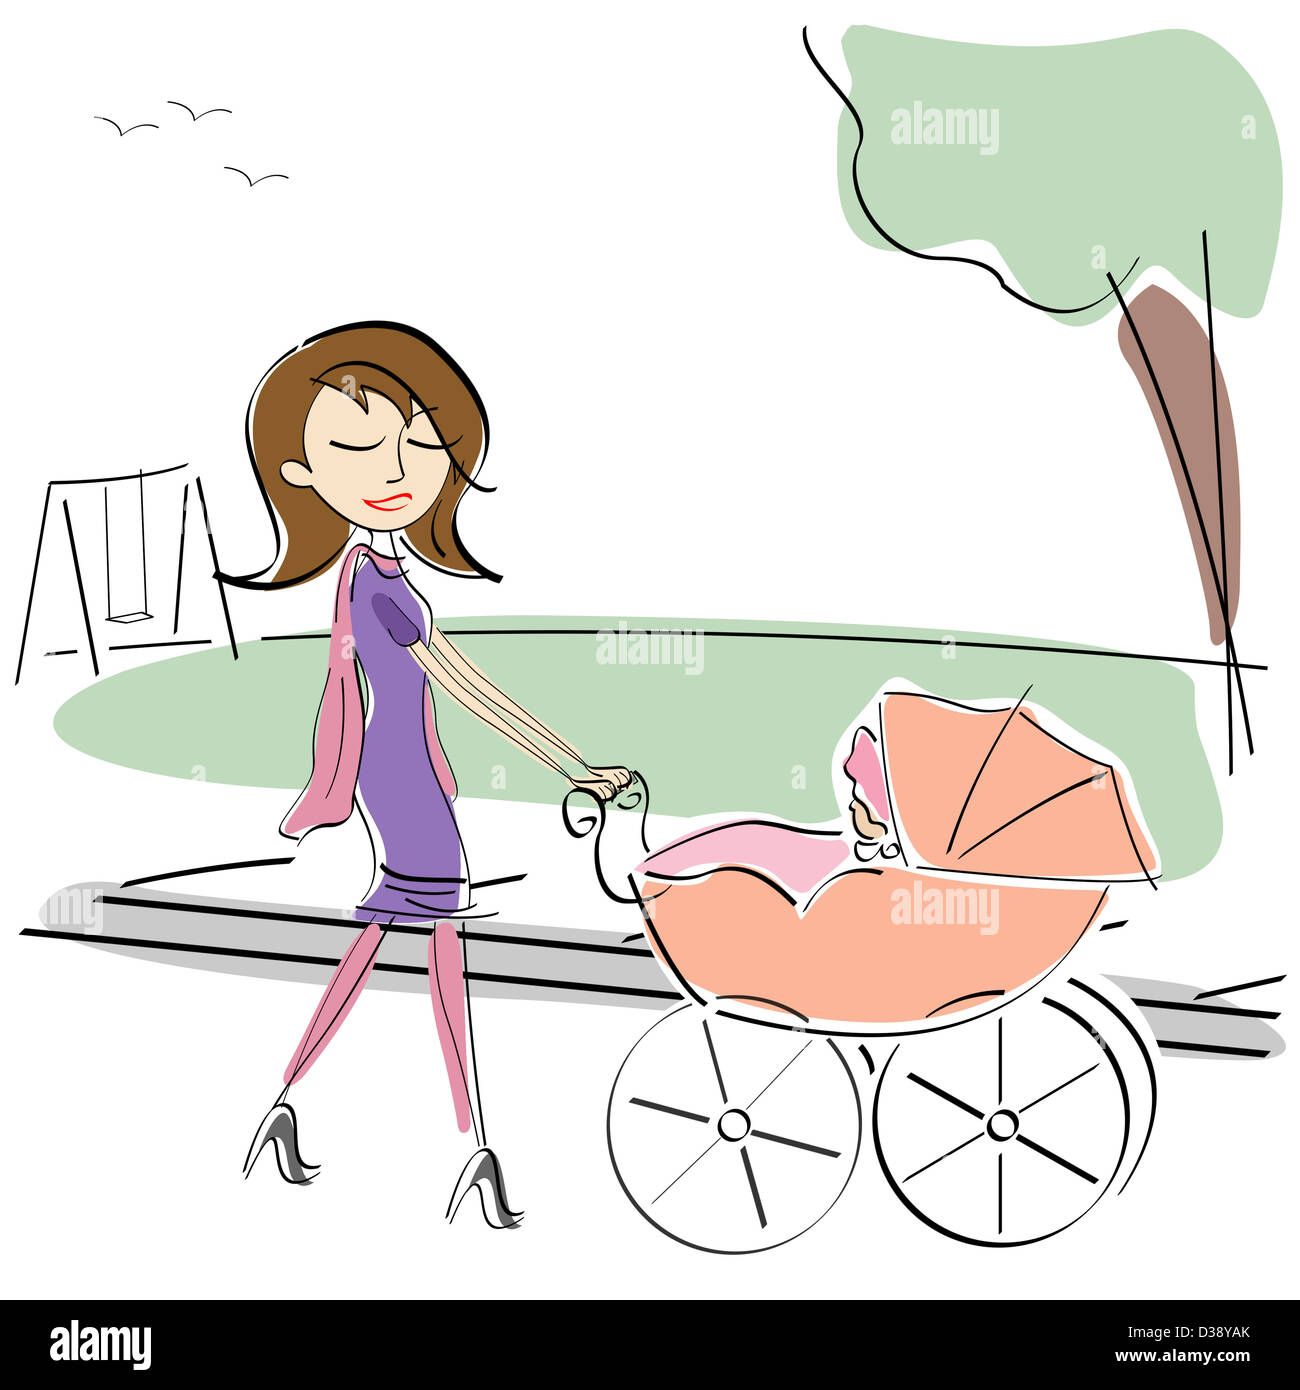 Woman pushing her baby in a stroller in a park Stock Photo